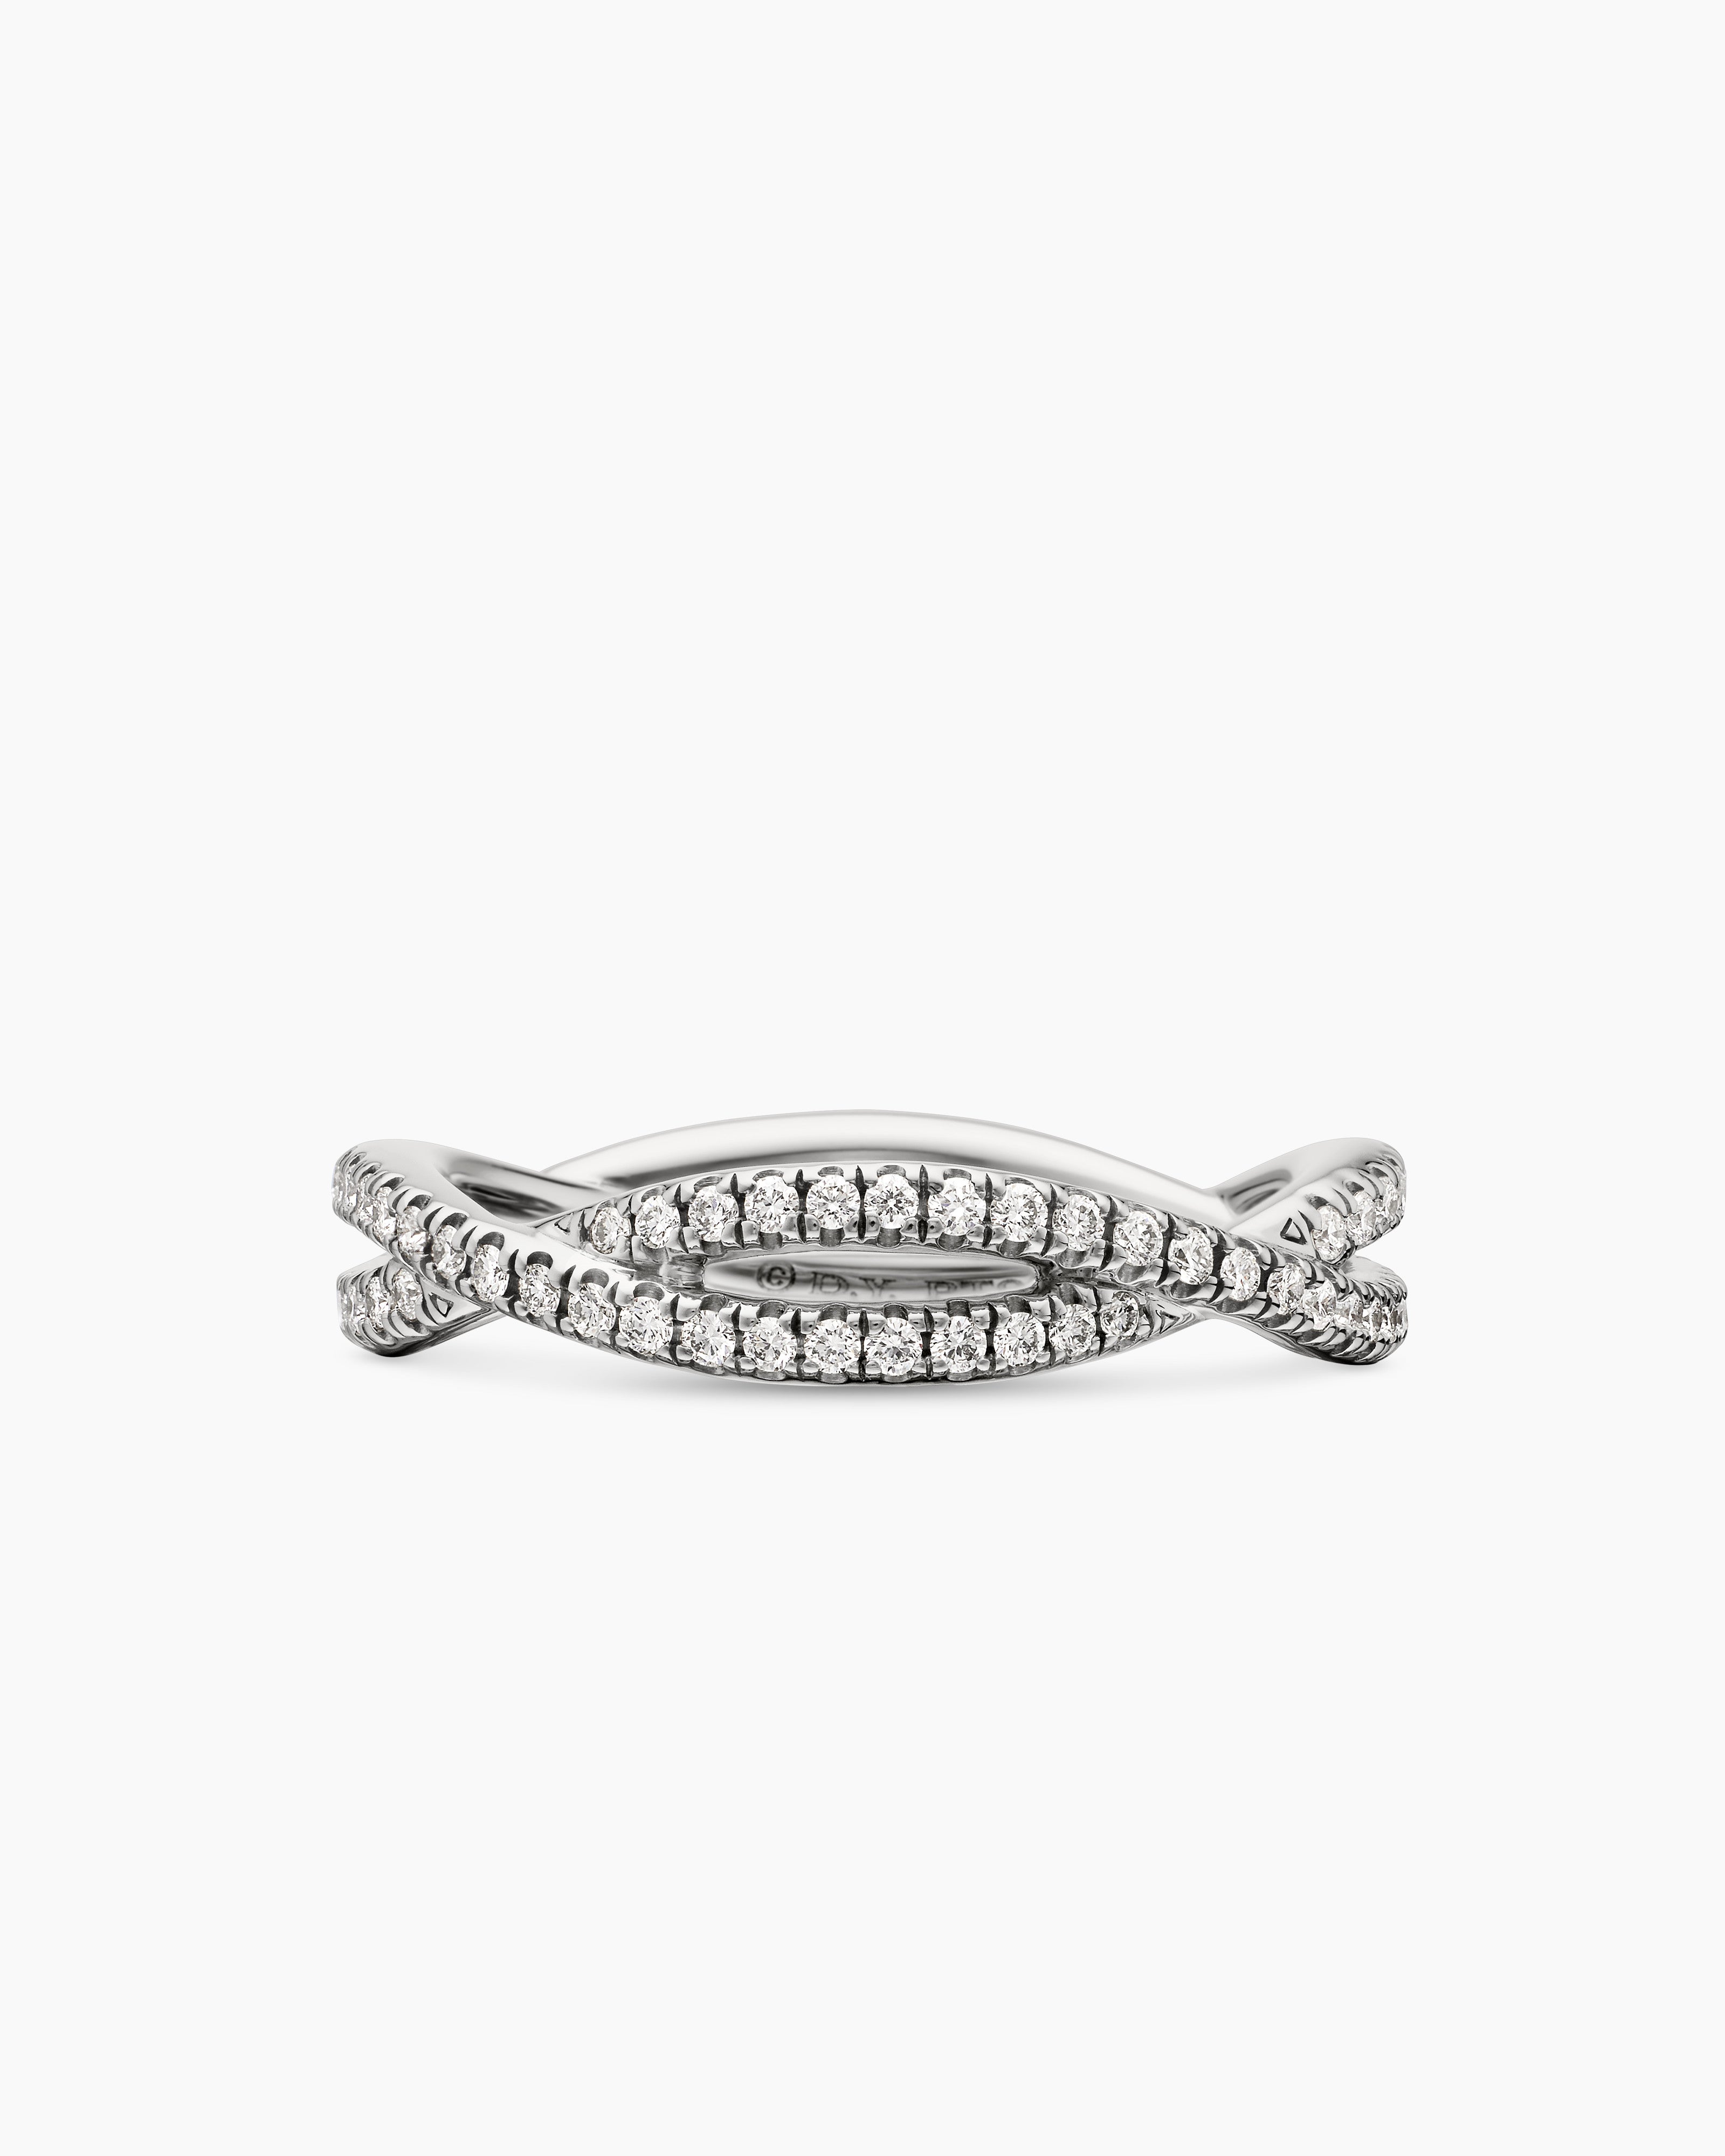 Set of You and Me For Infinity Comfort Fit Fingerprint Wedding Bands in  Sterling Silver – Brent&Jess Fingerprint jewelry- made with your  fingerprints